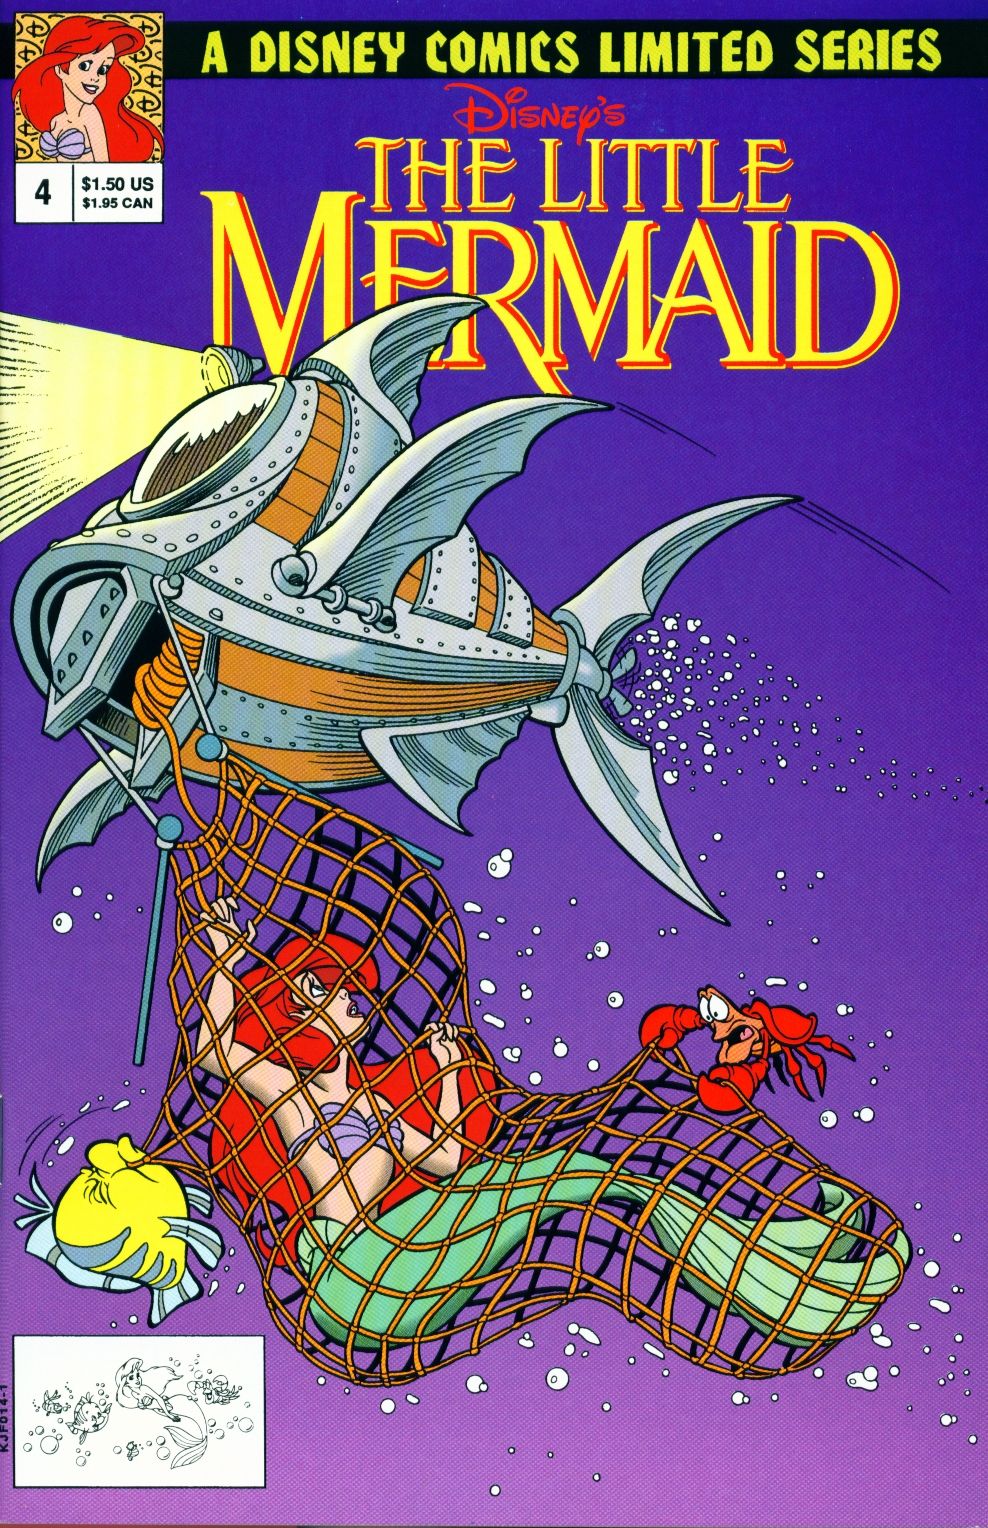 Disney S The Little Mermaid Limited Series Issue 4 | Read Disney S The  Little Mermaid Limited Series Issue 4 comic online in high quality. Read  Full Comic online for free -